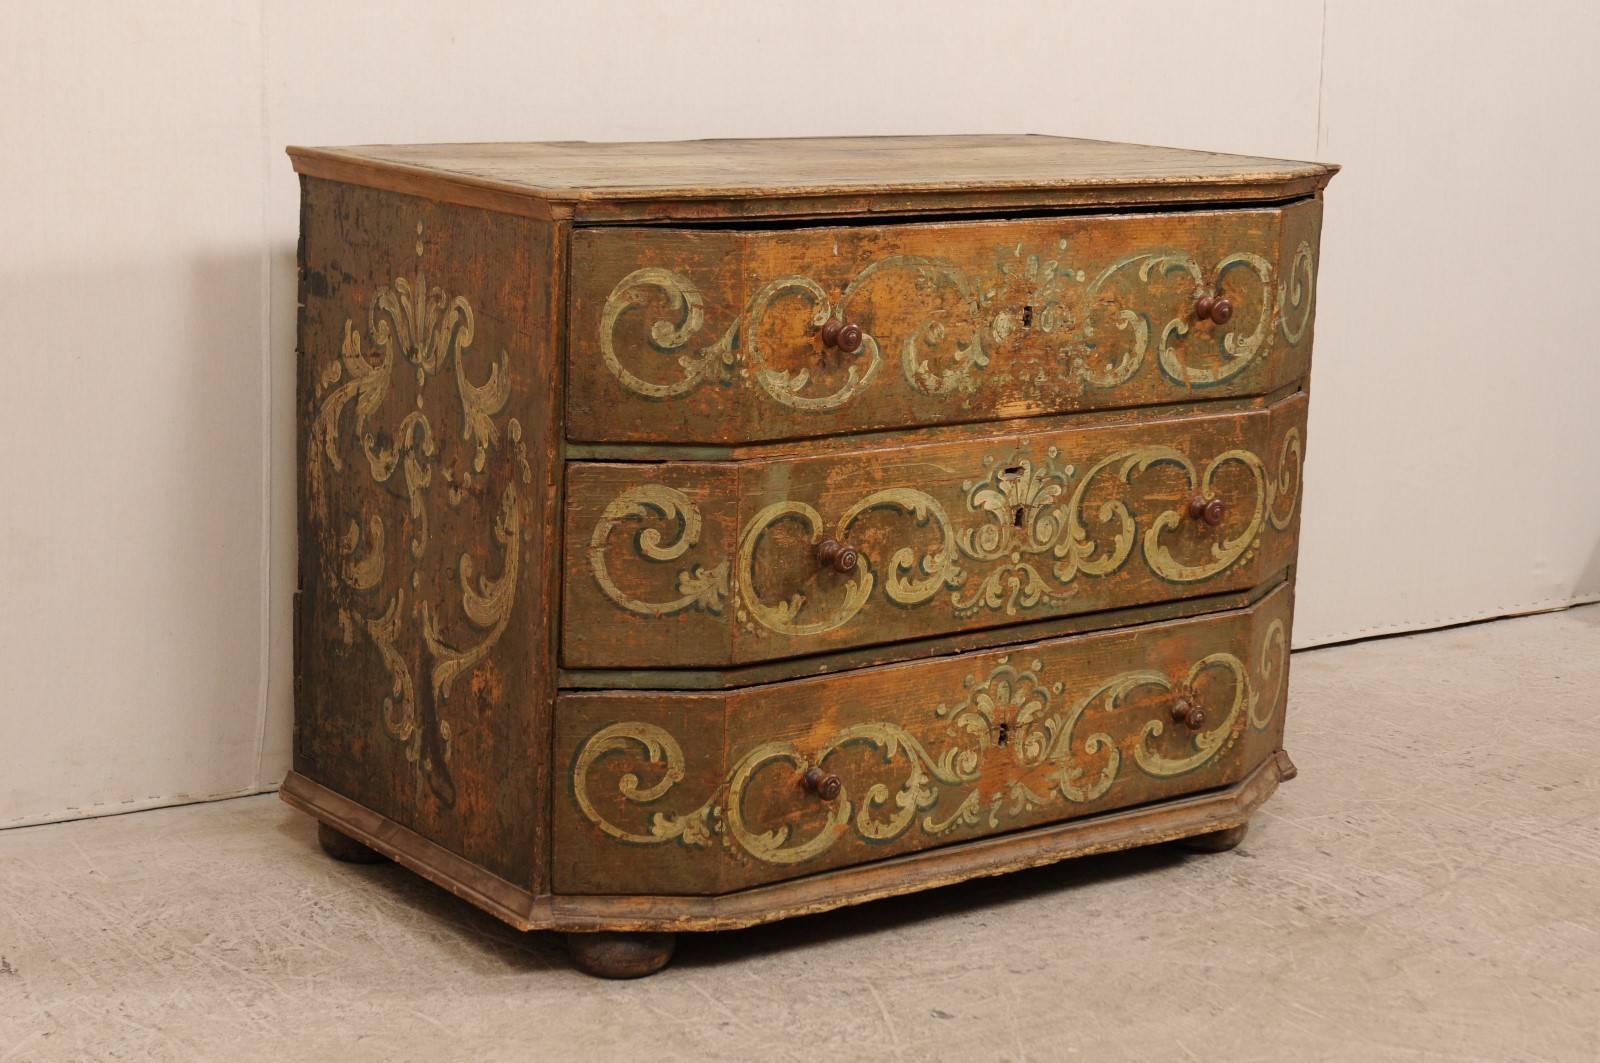 An 18th century Italian commode with canted drawers and hand-painted details. This antique Italian three-drawer commode has been uniquely designed with large canted drawers, and top which mimics this shape, giving this piece an robust chest. There